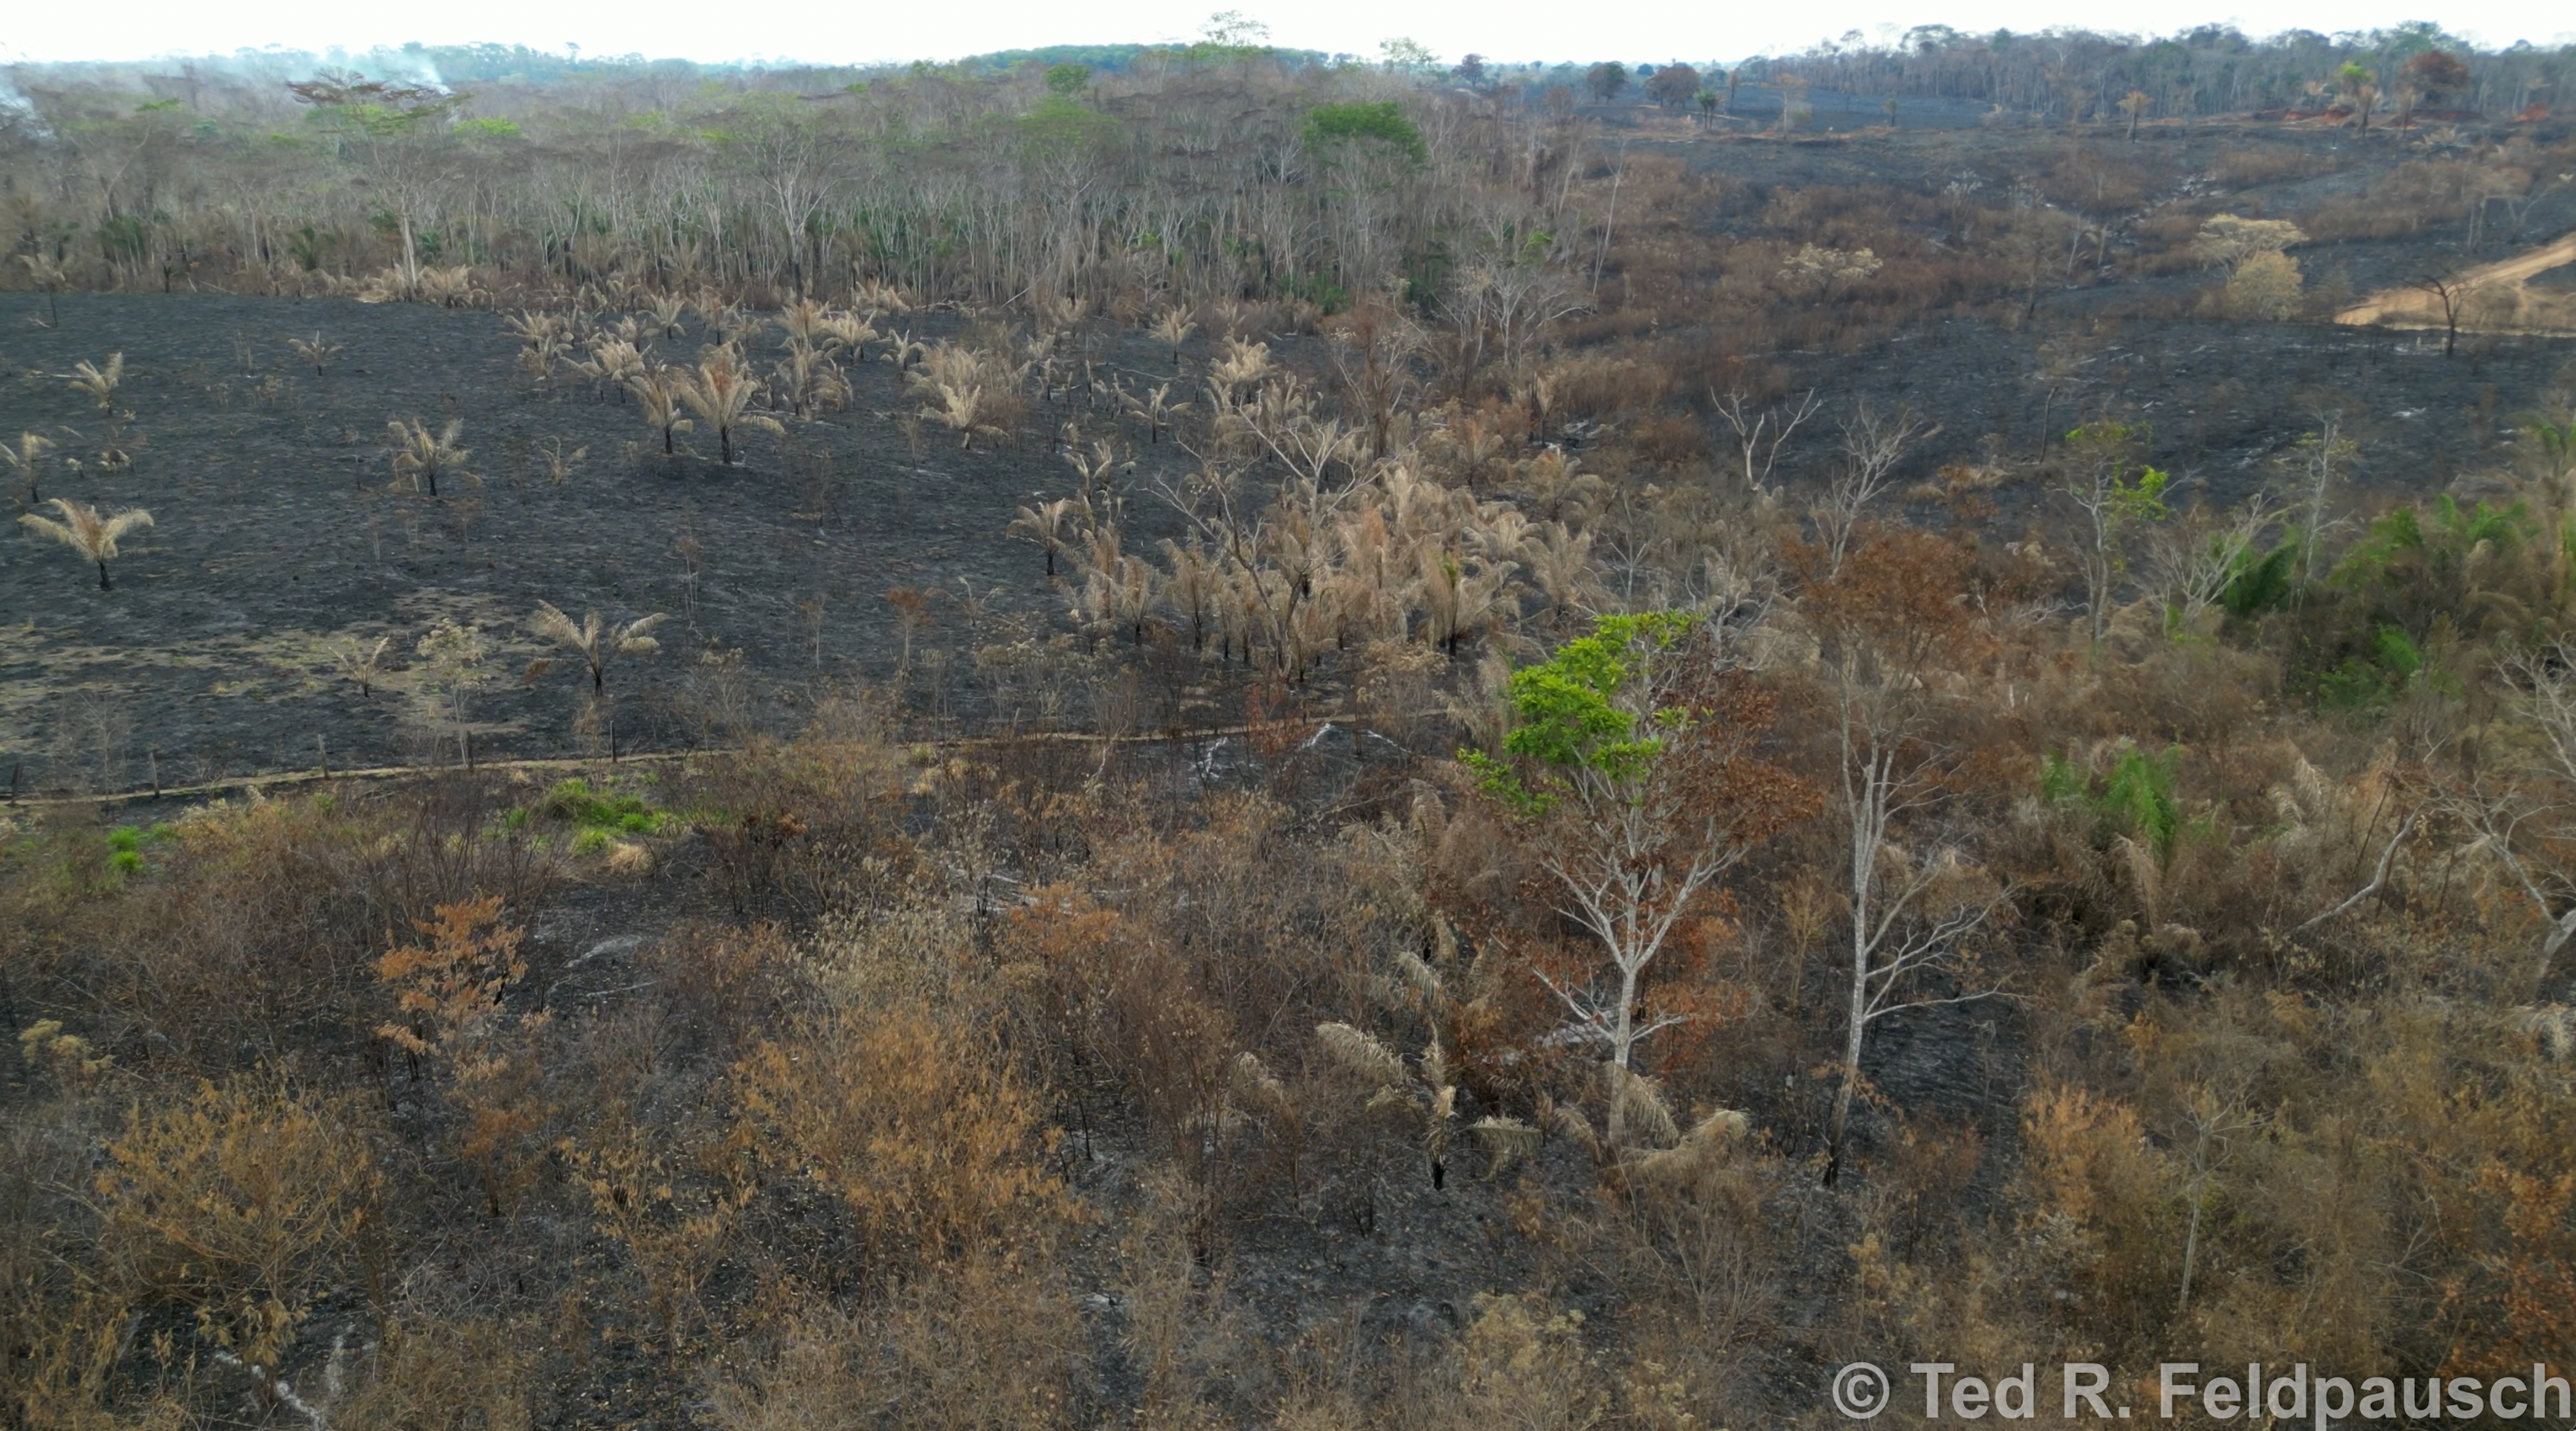 Postdoctoral Opportunity to Quantifying Soil Organic Carbon Responses to Landscape-Scale Fire in the Amazon